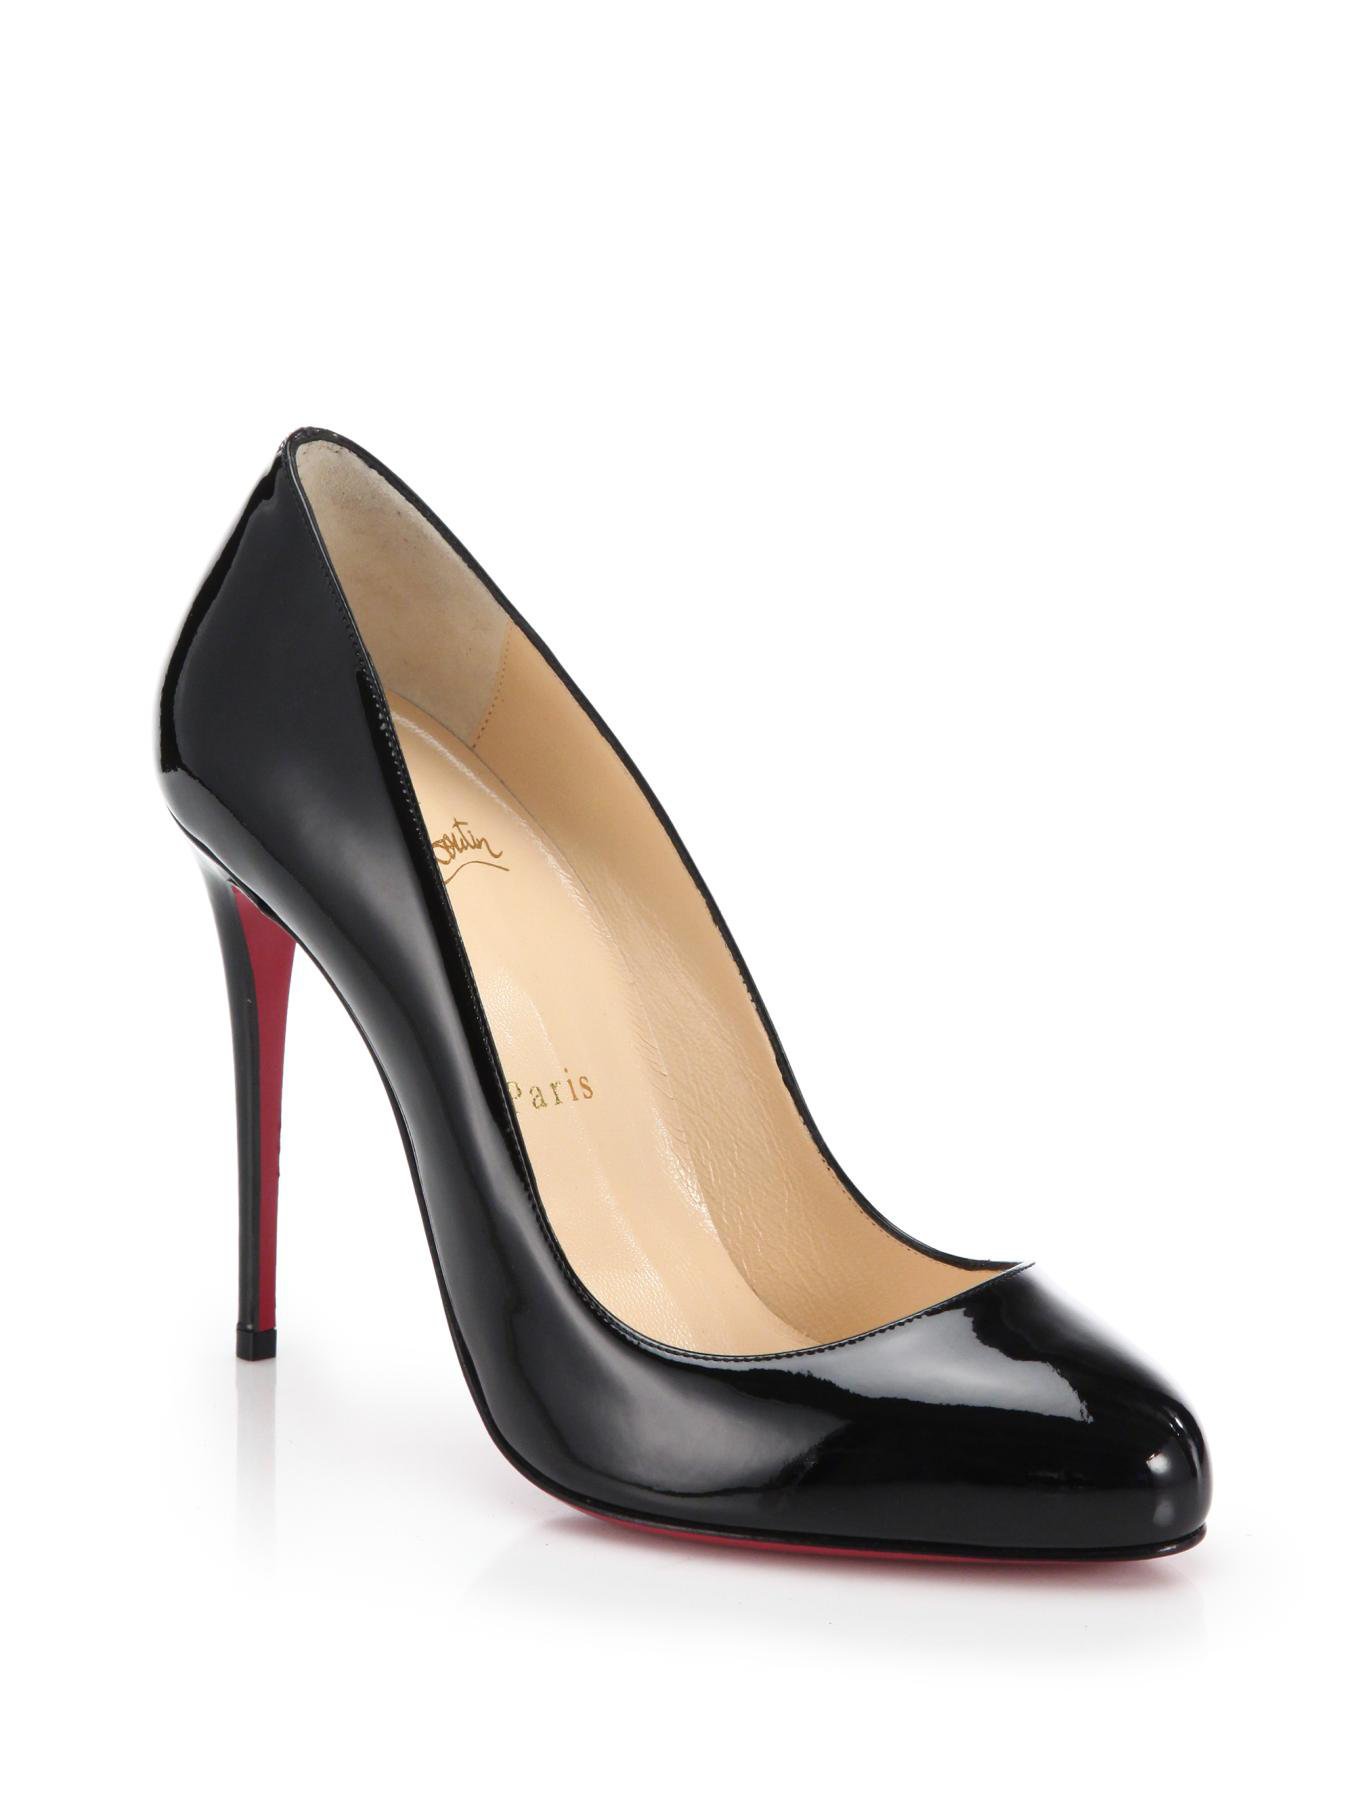 Christian Louboutin Dorissima Patent Leather Pumps in Black | Lyst